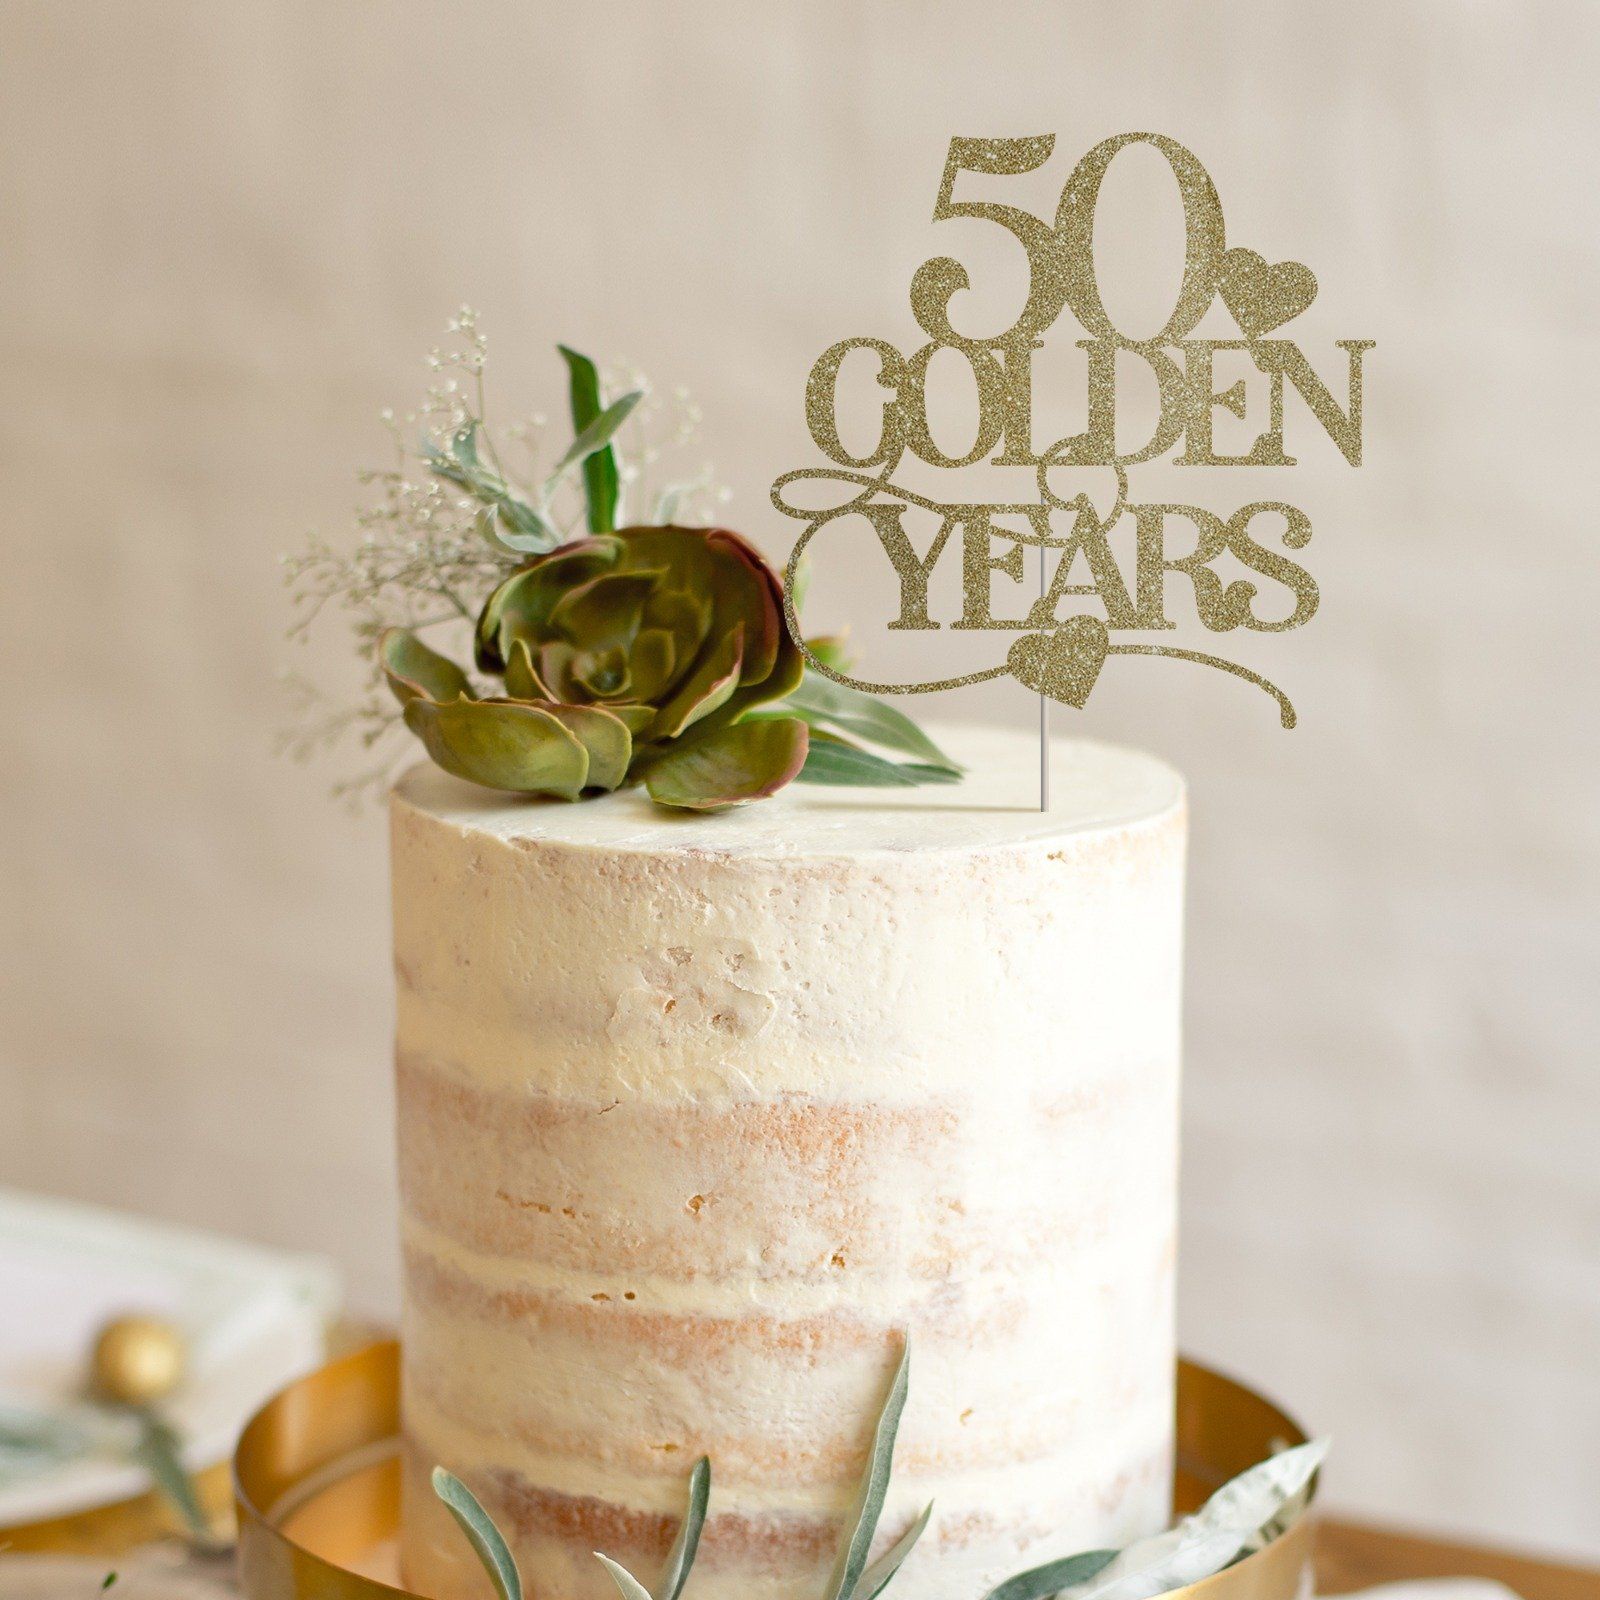 50 golden years cake topper, Wedding anniversary party decor, Gold ...